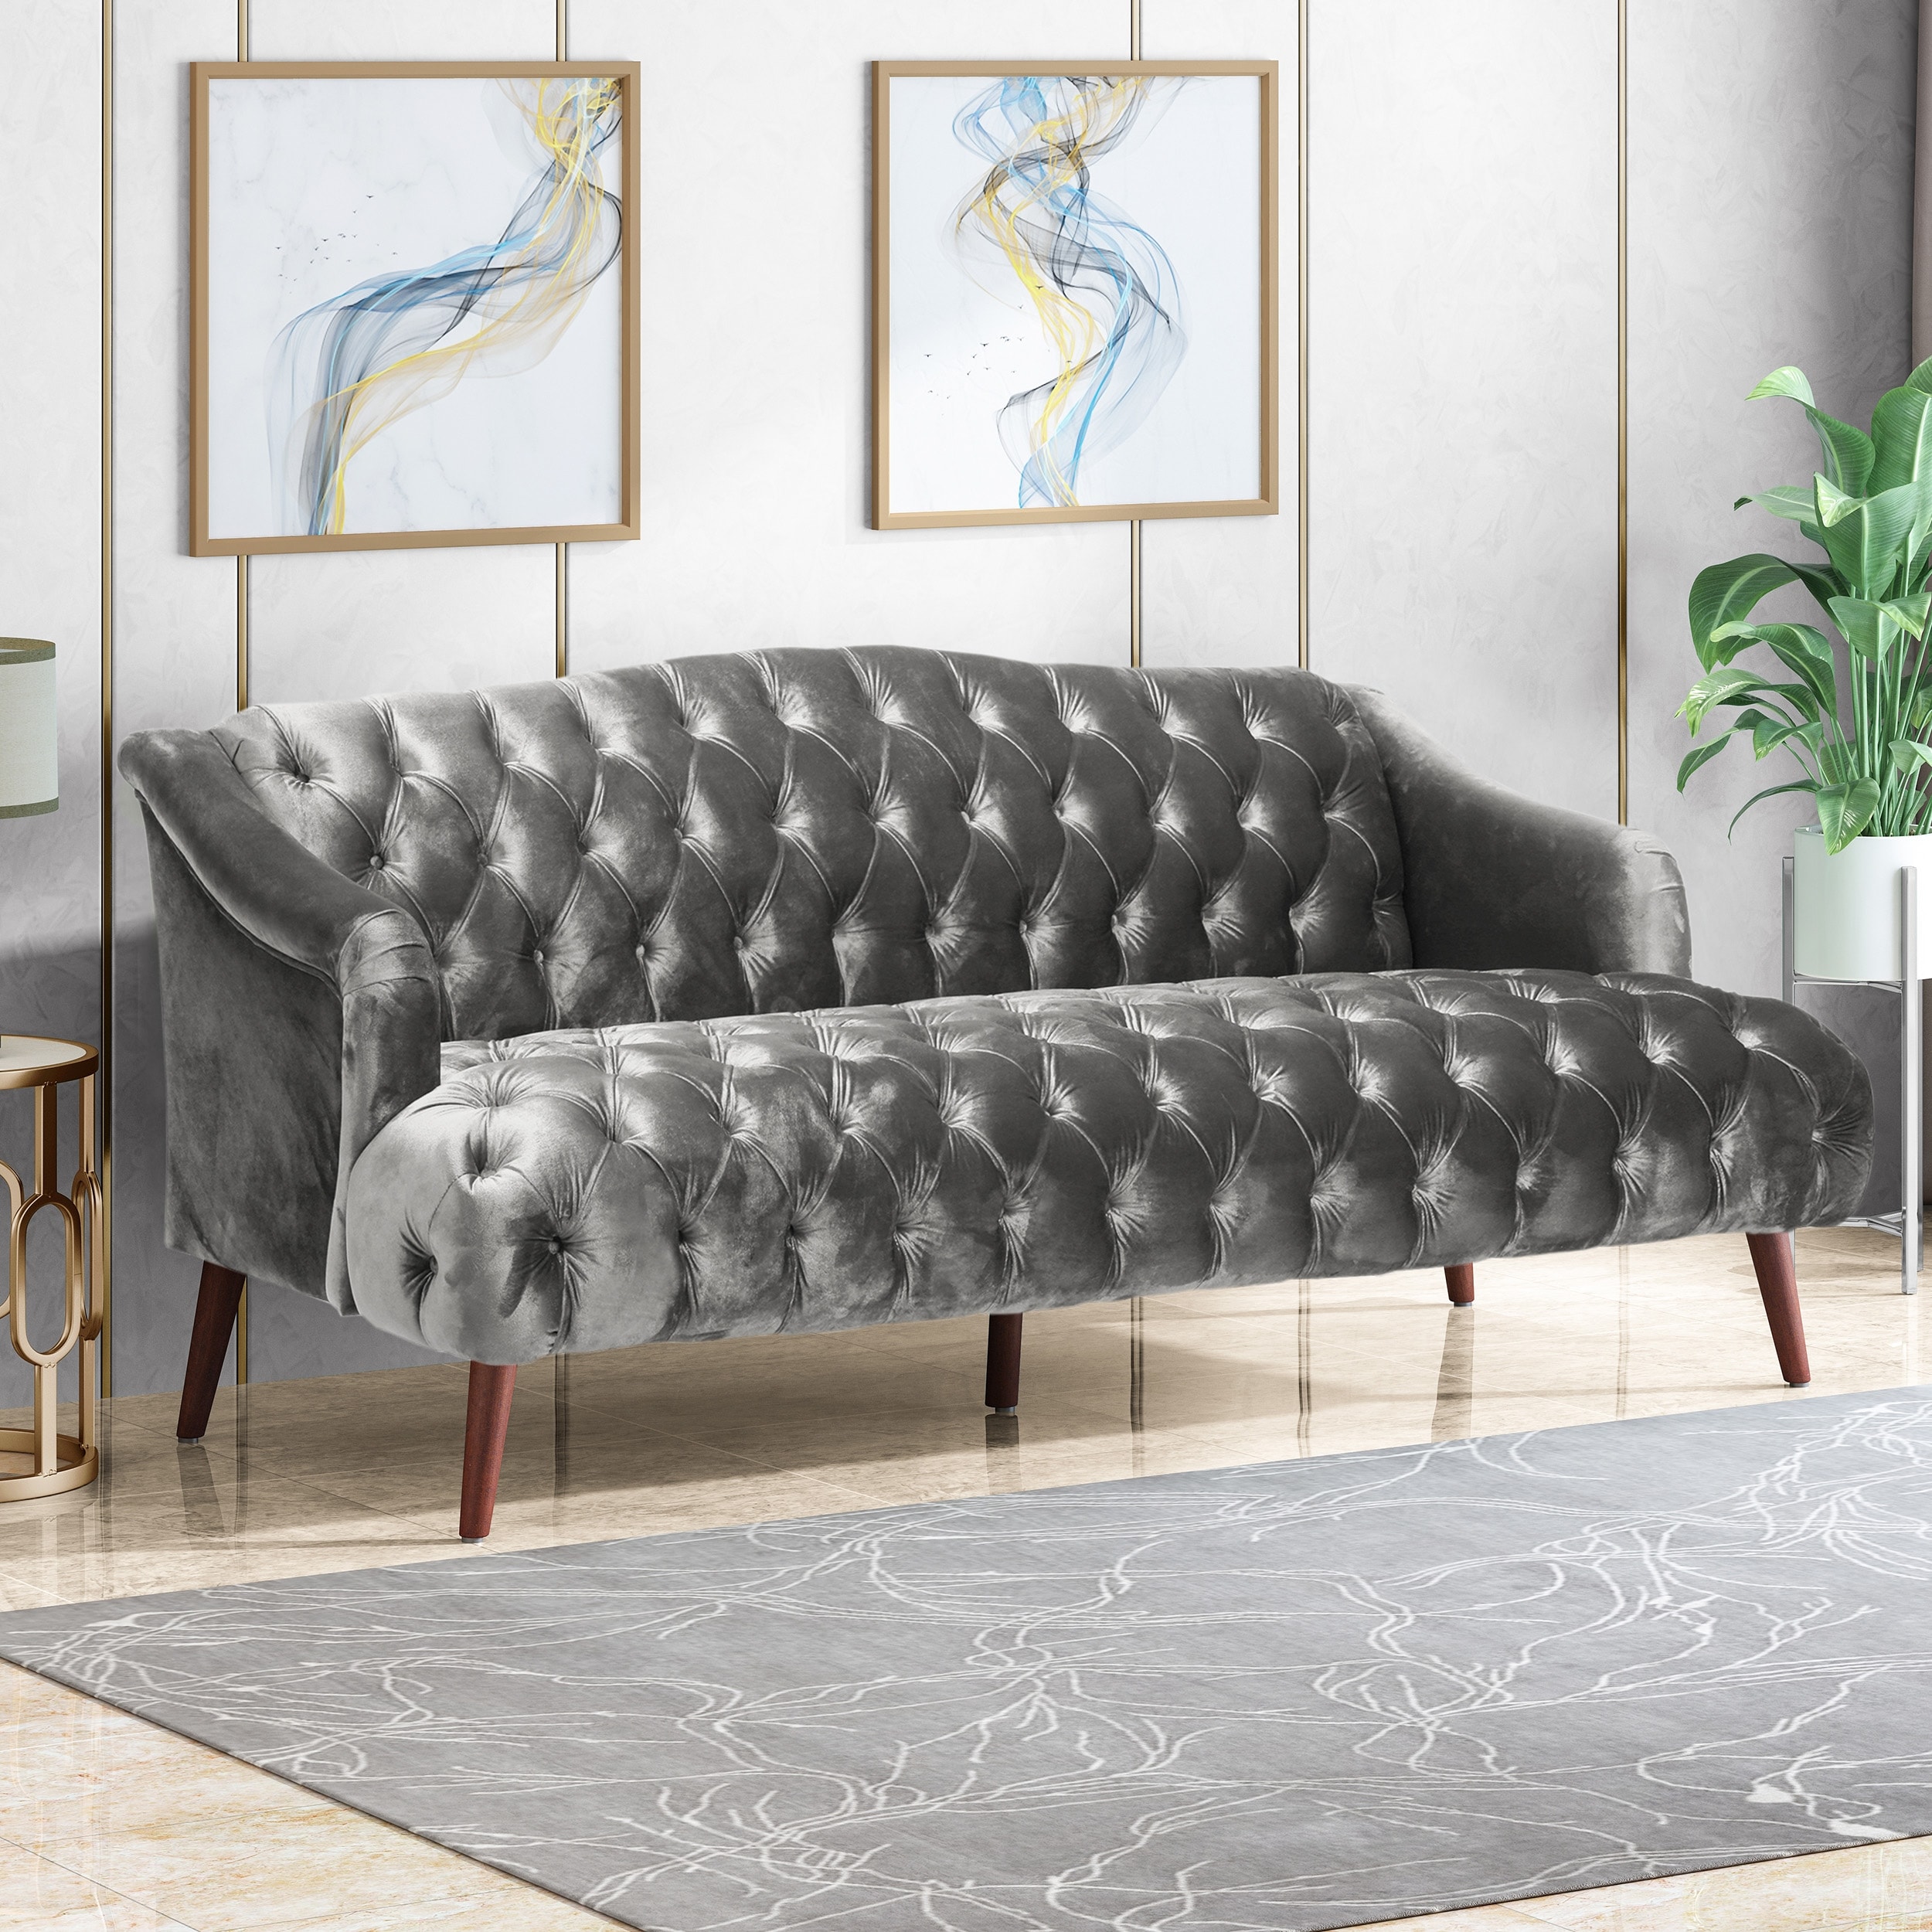 Adelia Modern Glam Tufted Sale Christopher by Sofa Beyond - - Home - 28676368 Bath Bed Knight & Velvet On